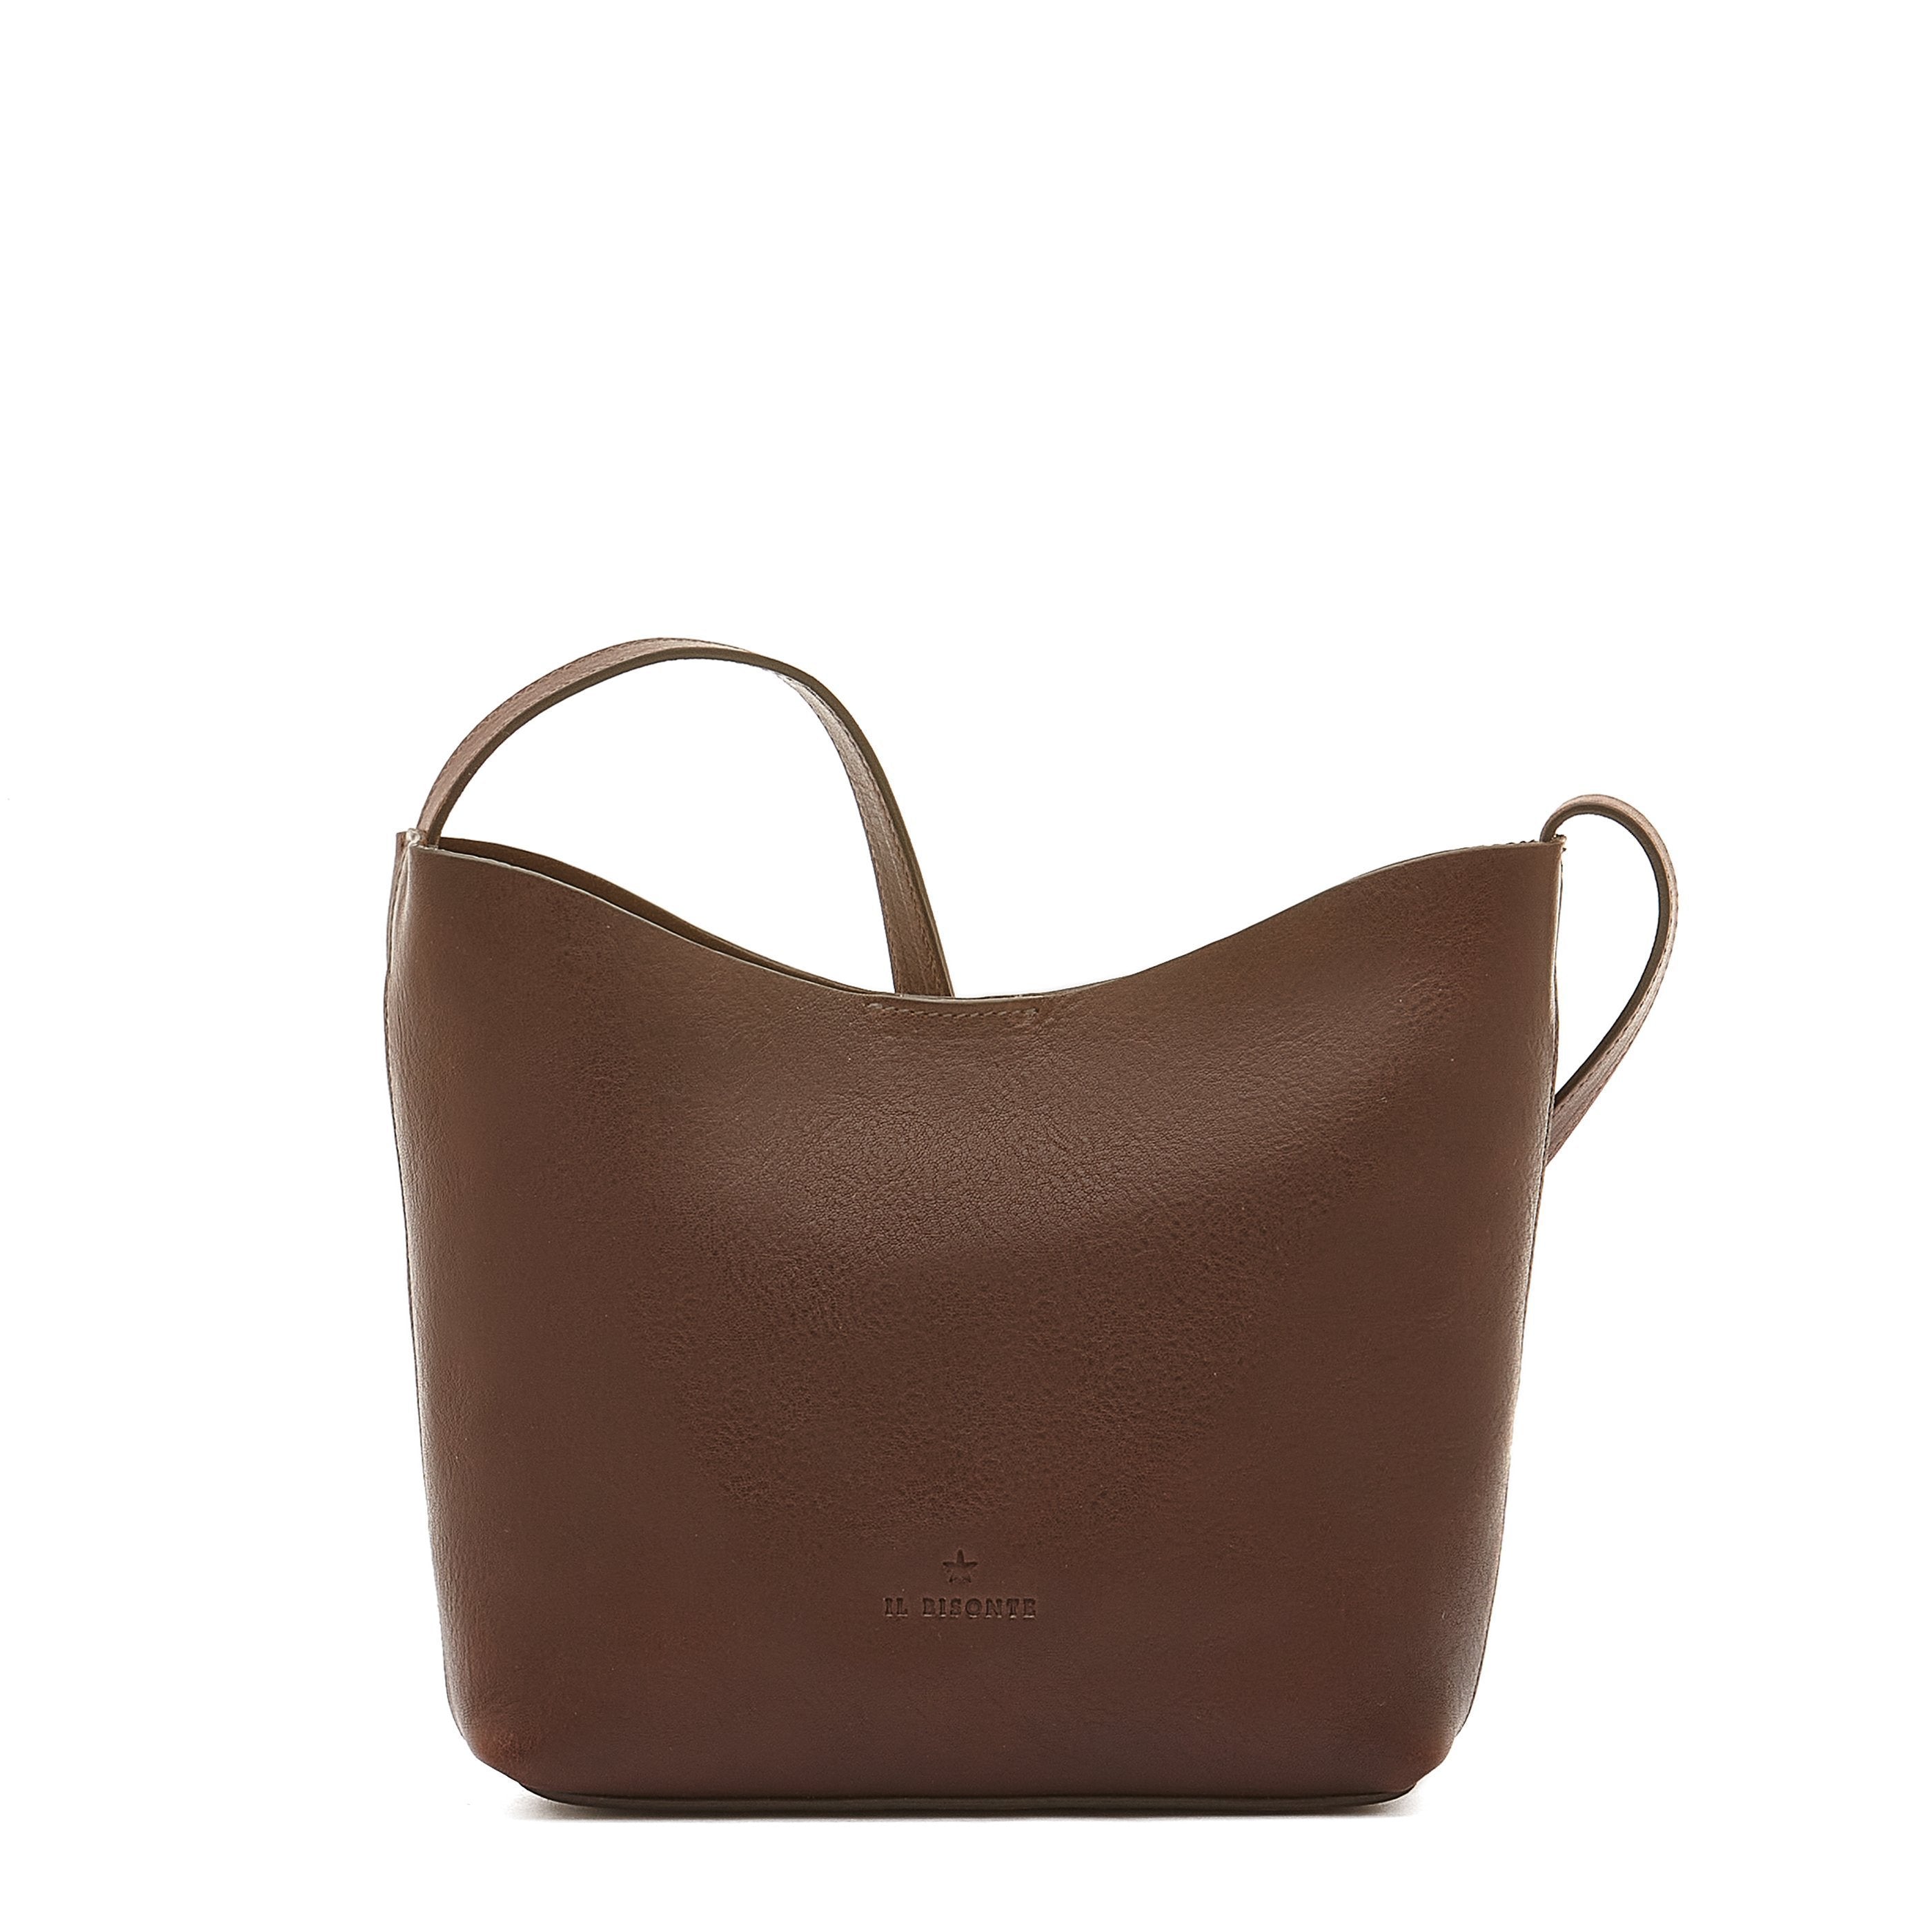 Le laudi | Women's crossbody bag in vintage leather color coffee